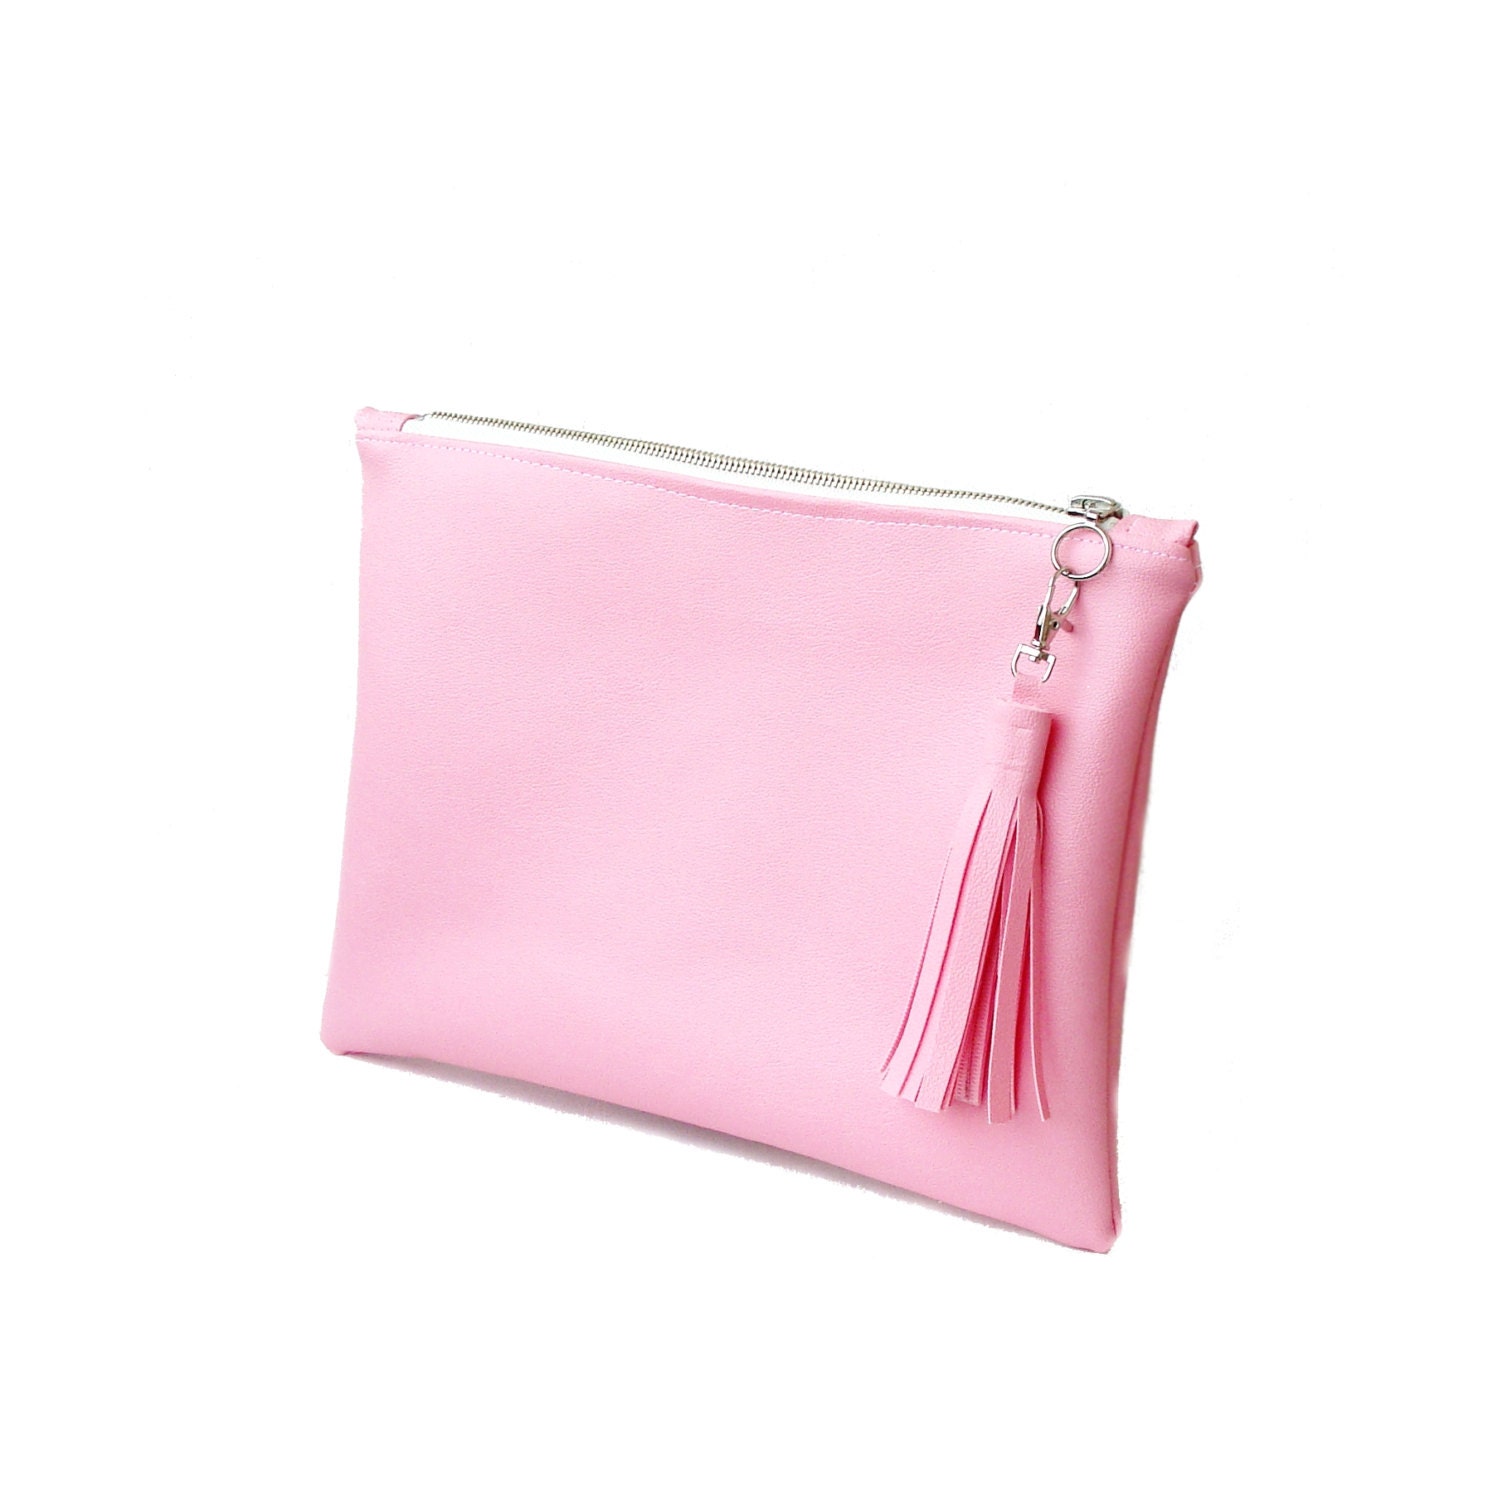 Pink leather clutch large leather clutch leather bag maxi